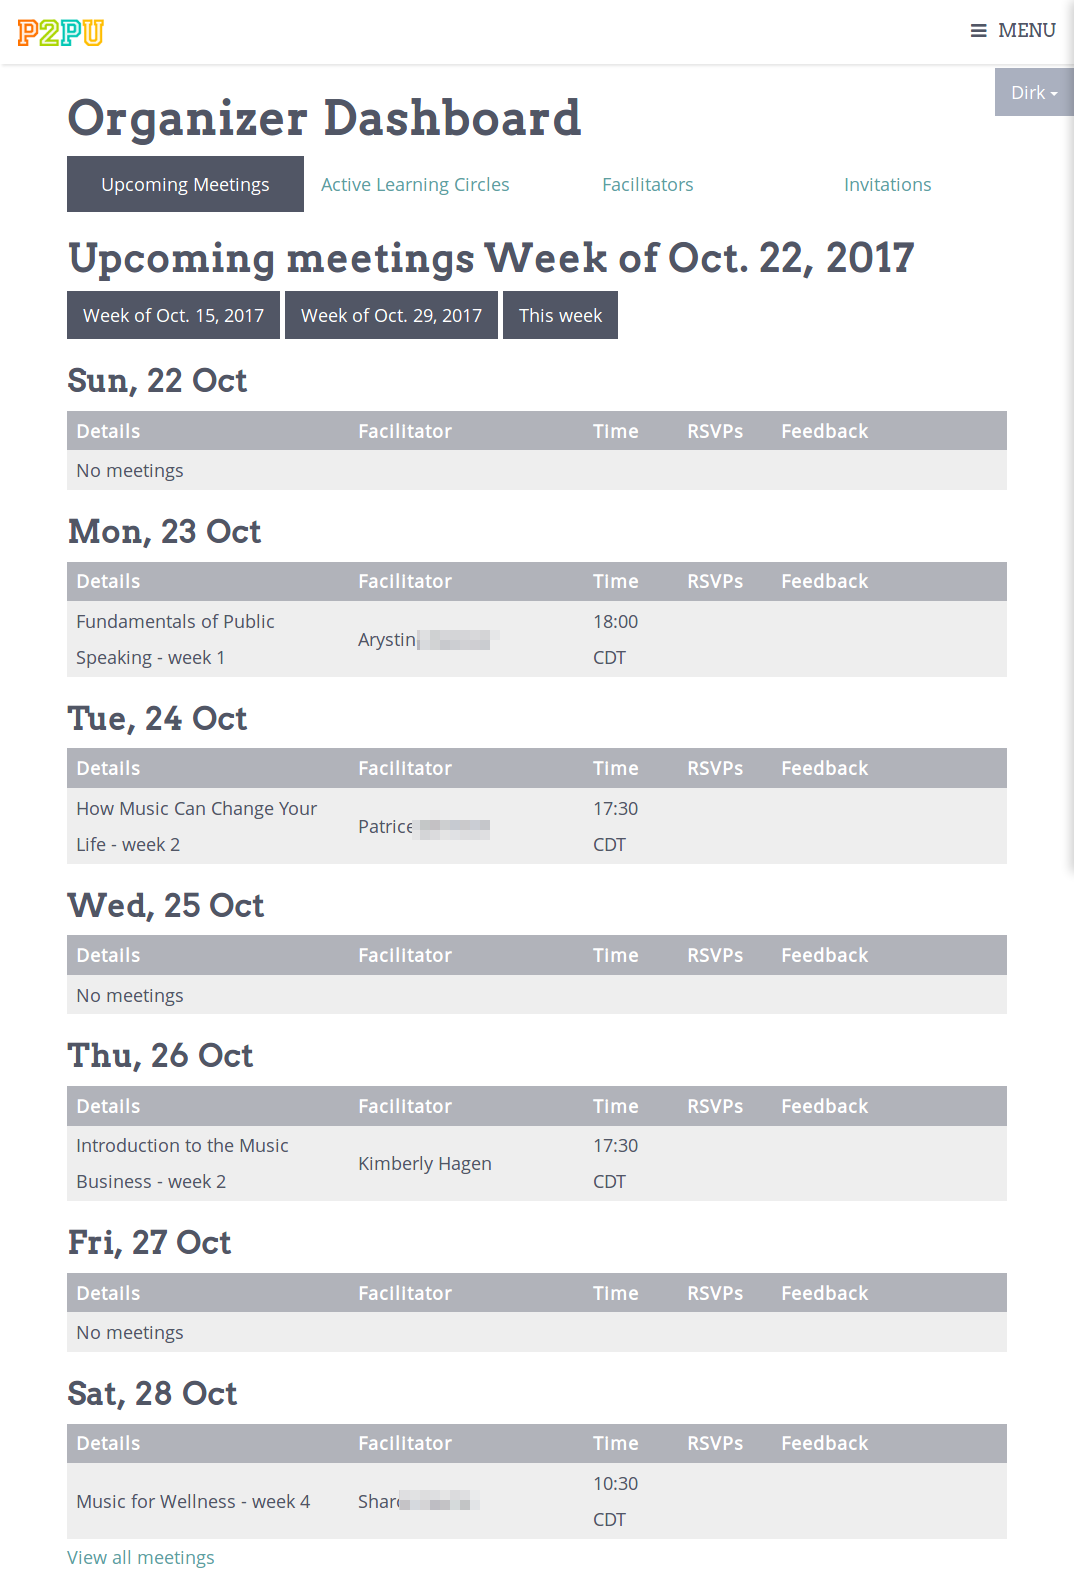 _images/organizer-dashboard-upcoming-meetings.png